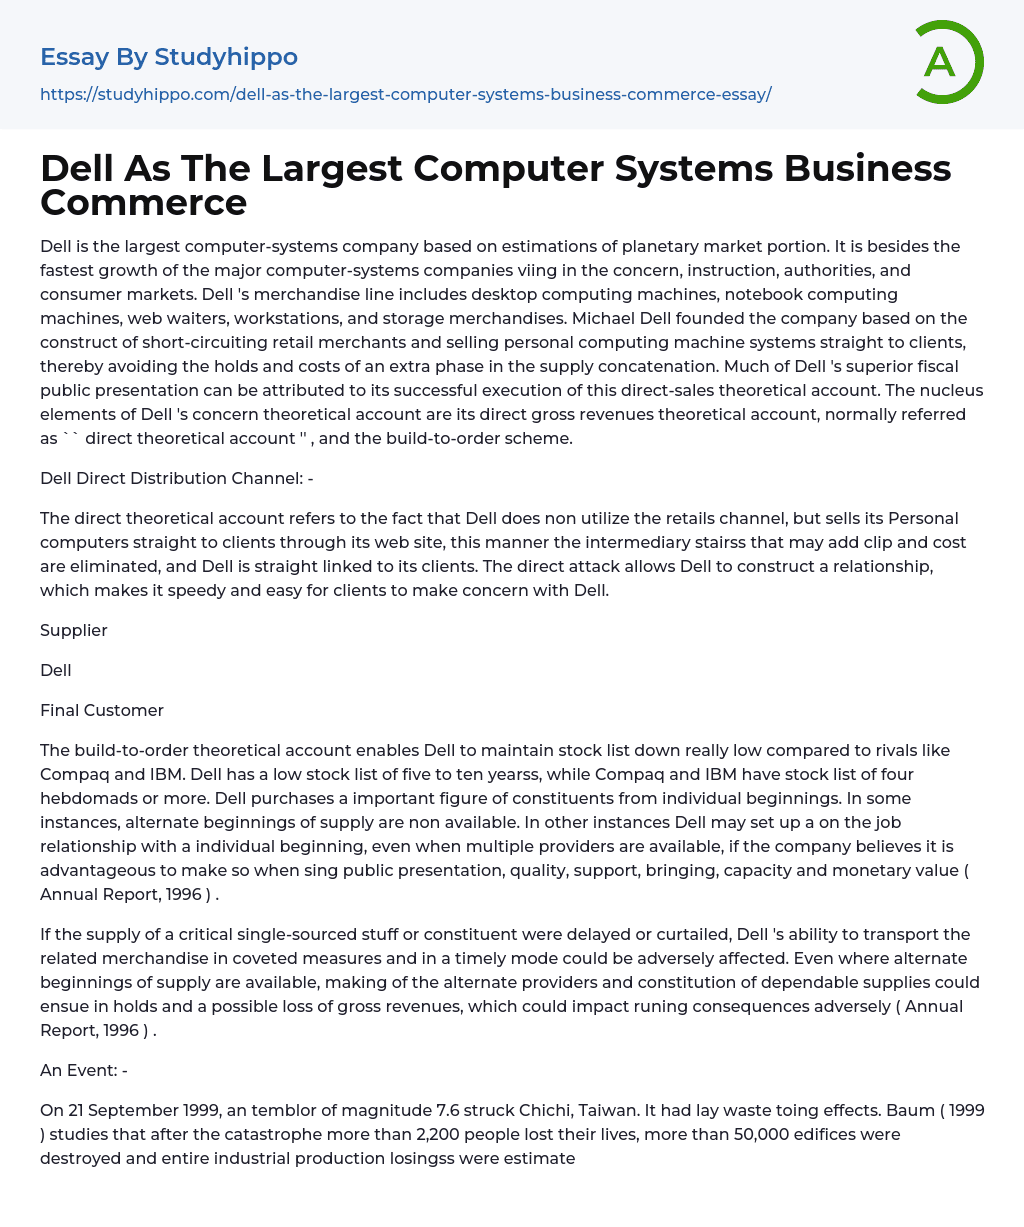 Dell As The Largest Computer Systems Business Commerce Essay Example